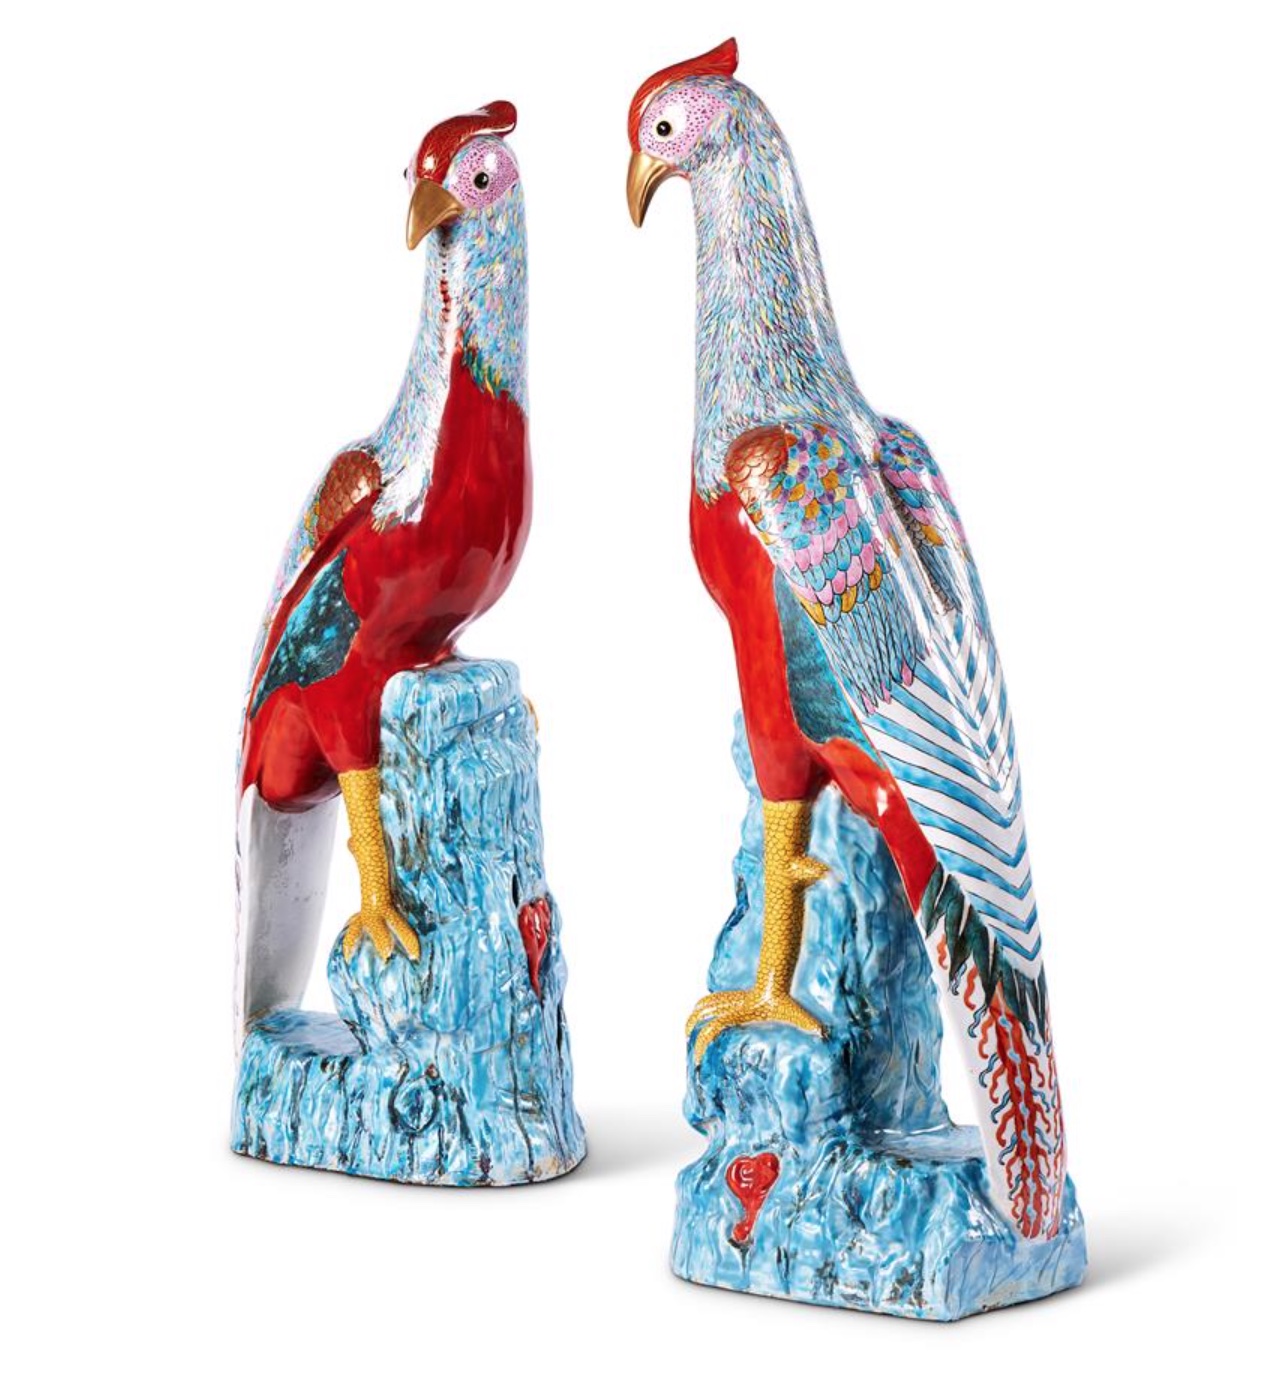 A pair of porcelain pheasants in the mid 18th-century Chinese export manner